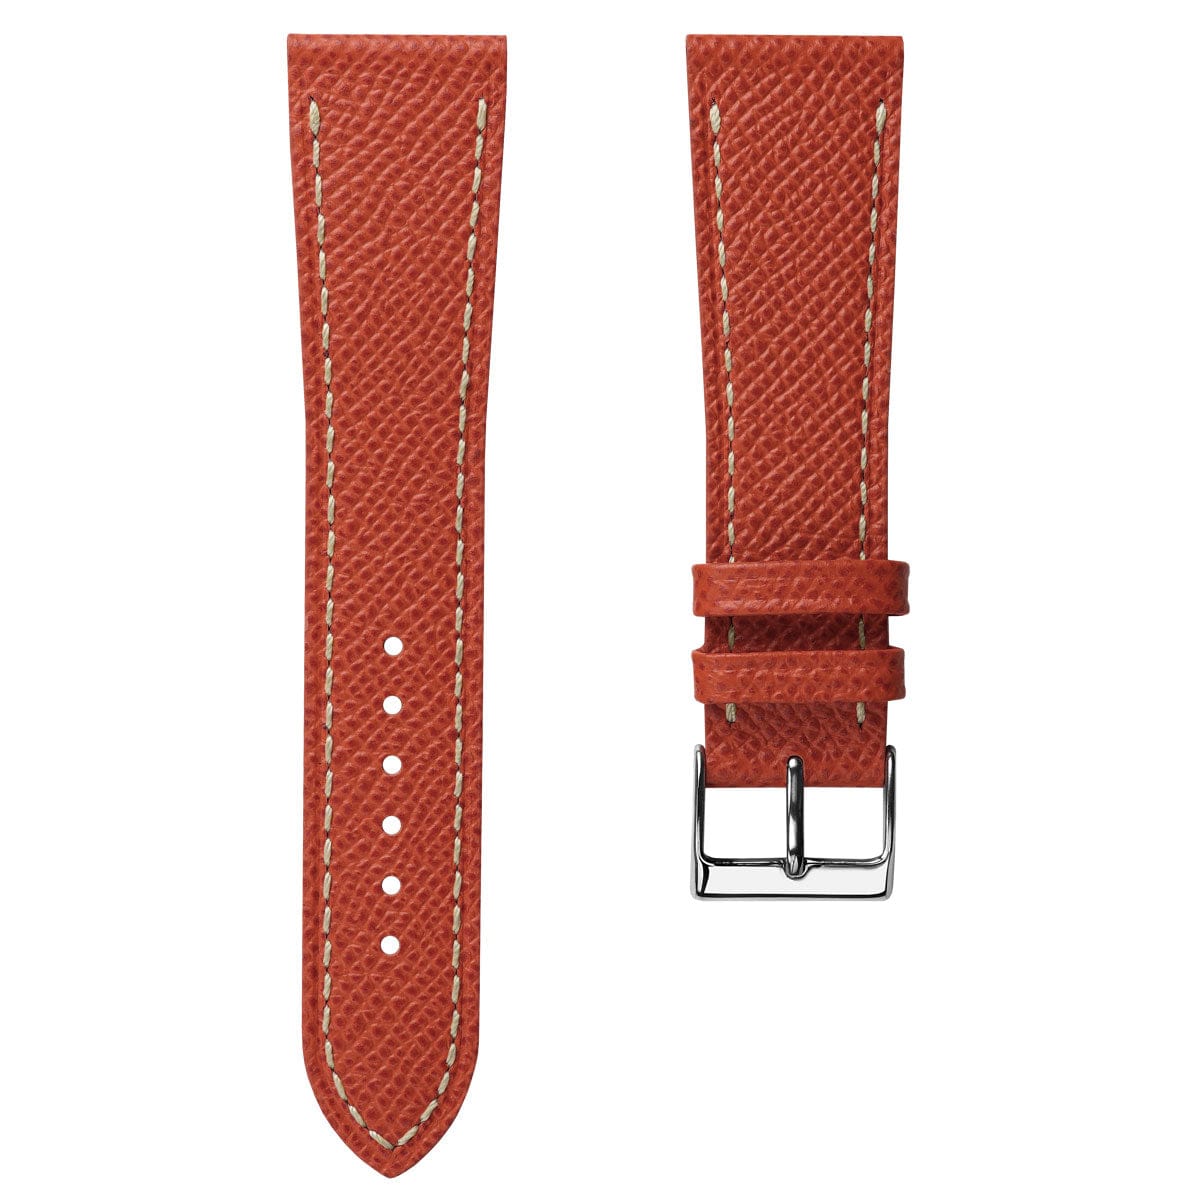 Sestriere Hand Stitched Italian Leather Watch Strap  - Alpine Red